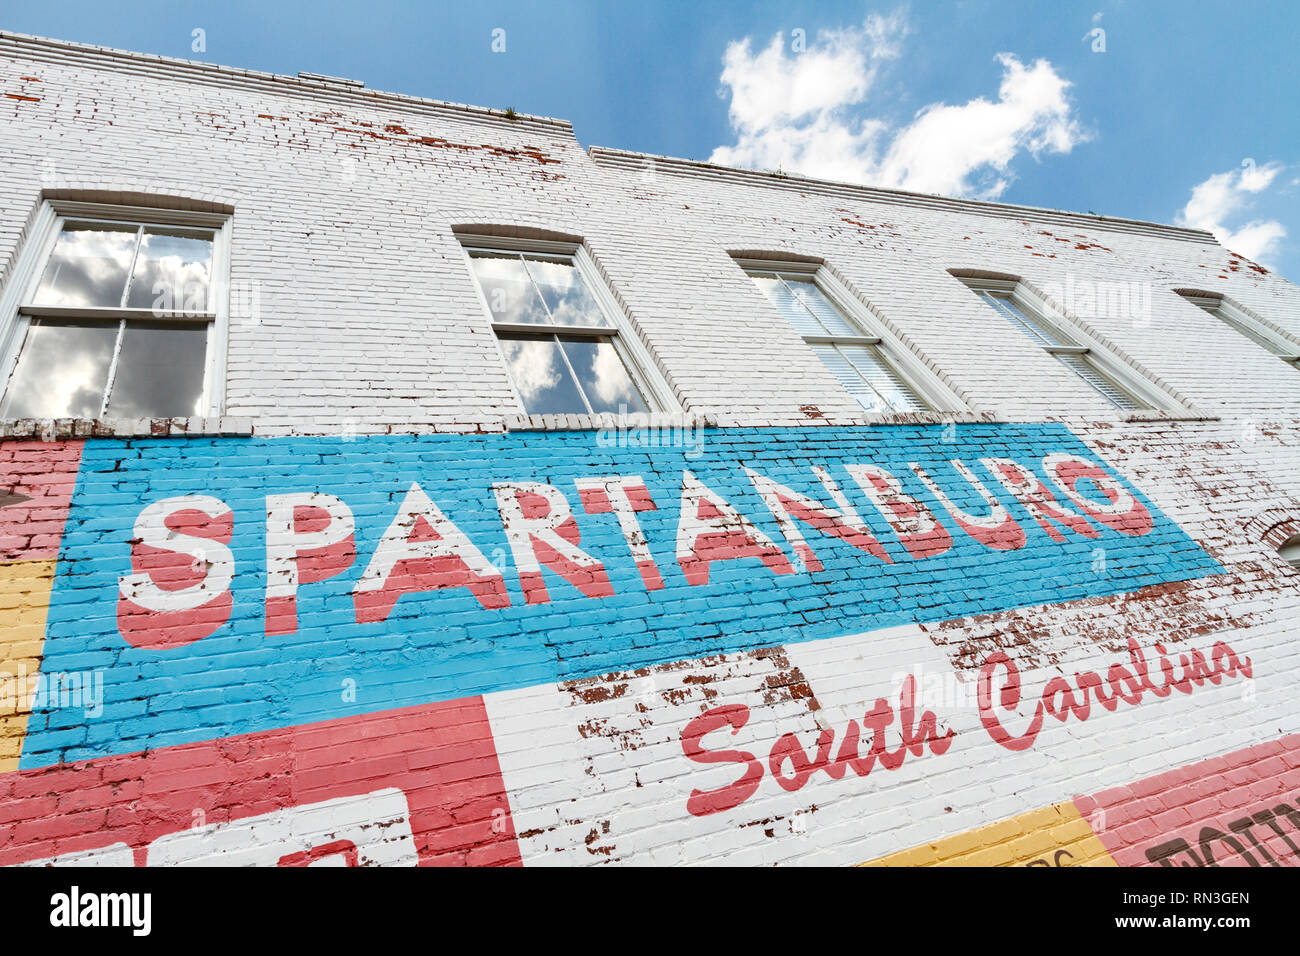 Close up detail of the words Spartanburg South Carolina on the large public mural painted on a brick building in downtown Spartanburg SC. Stock Photo